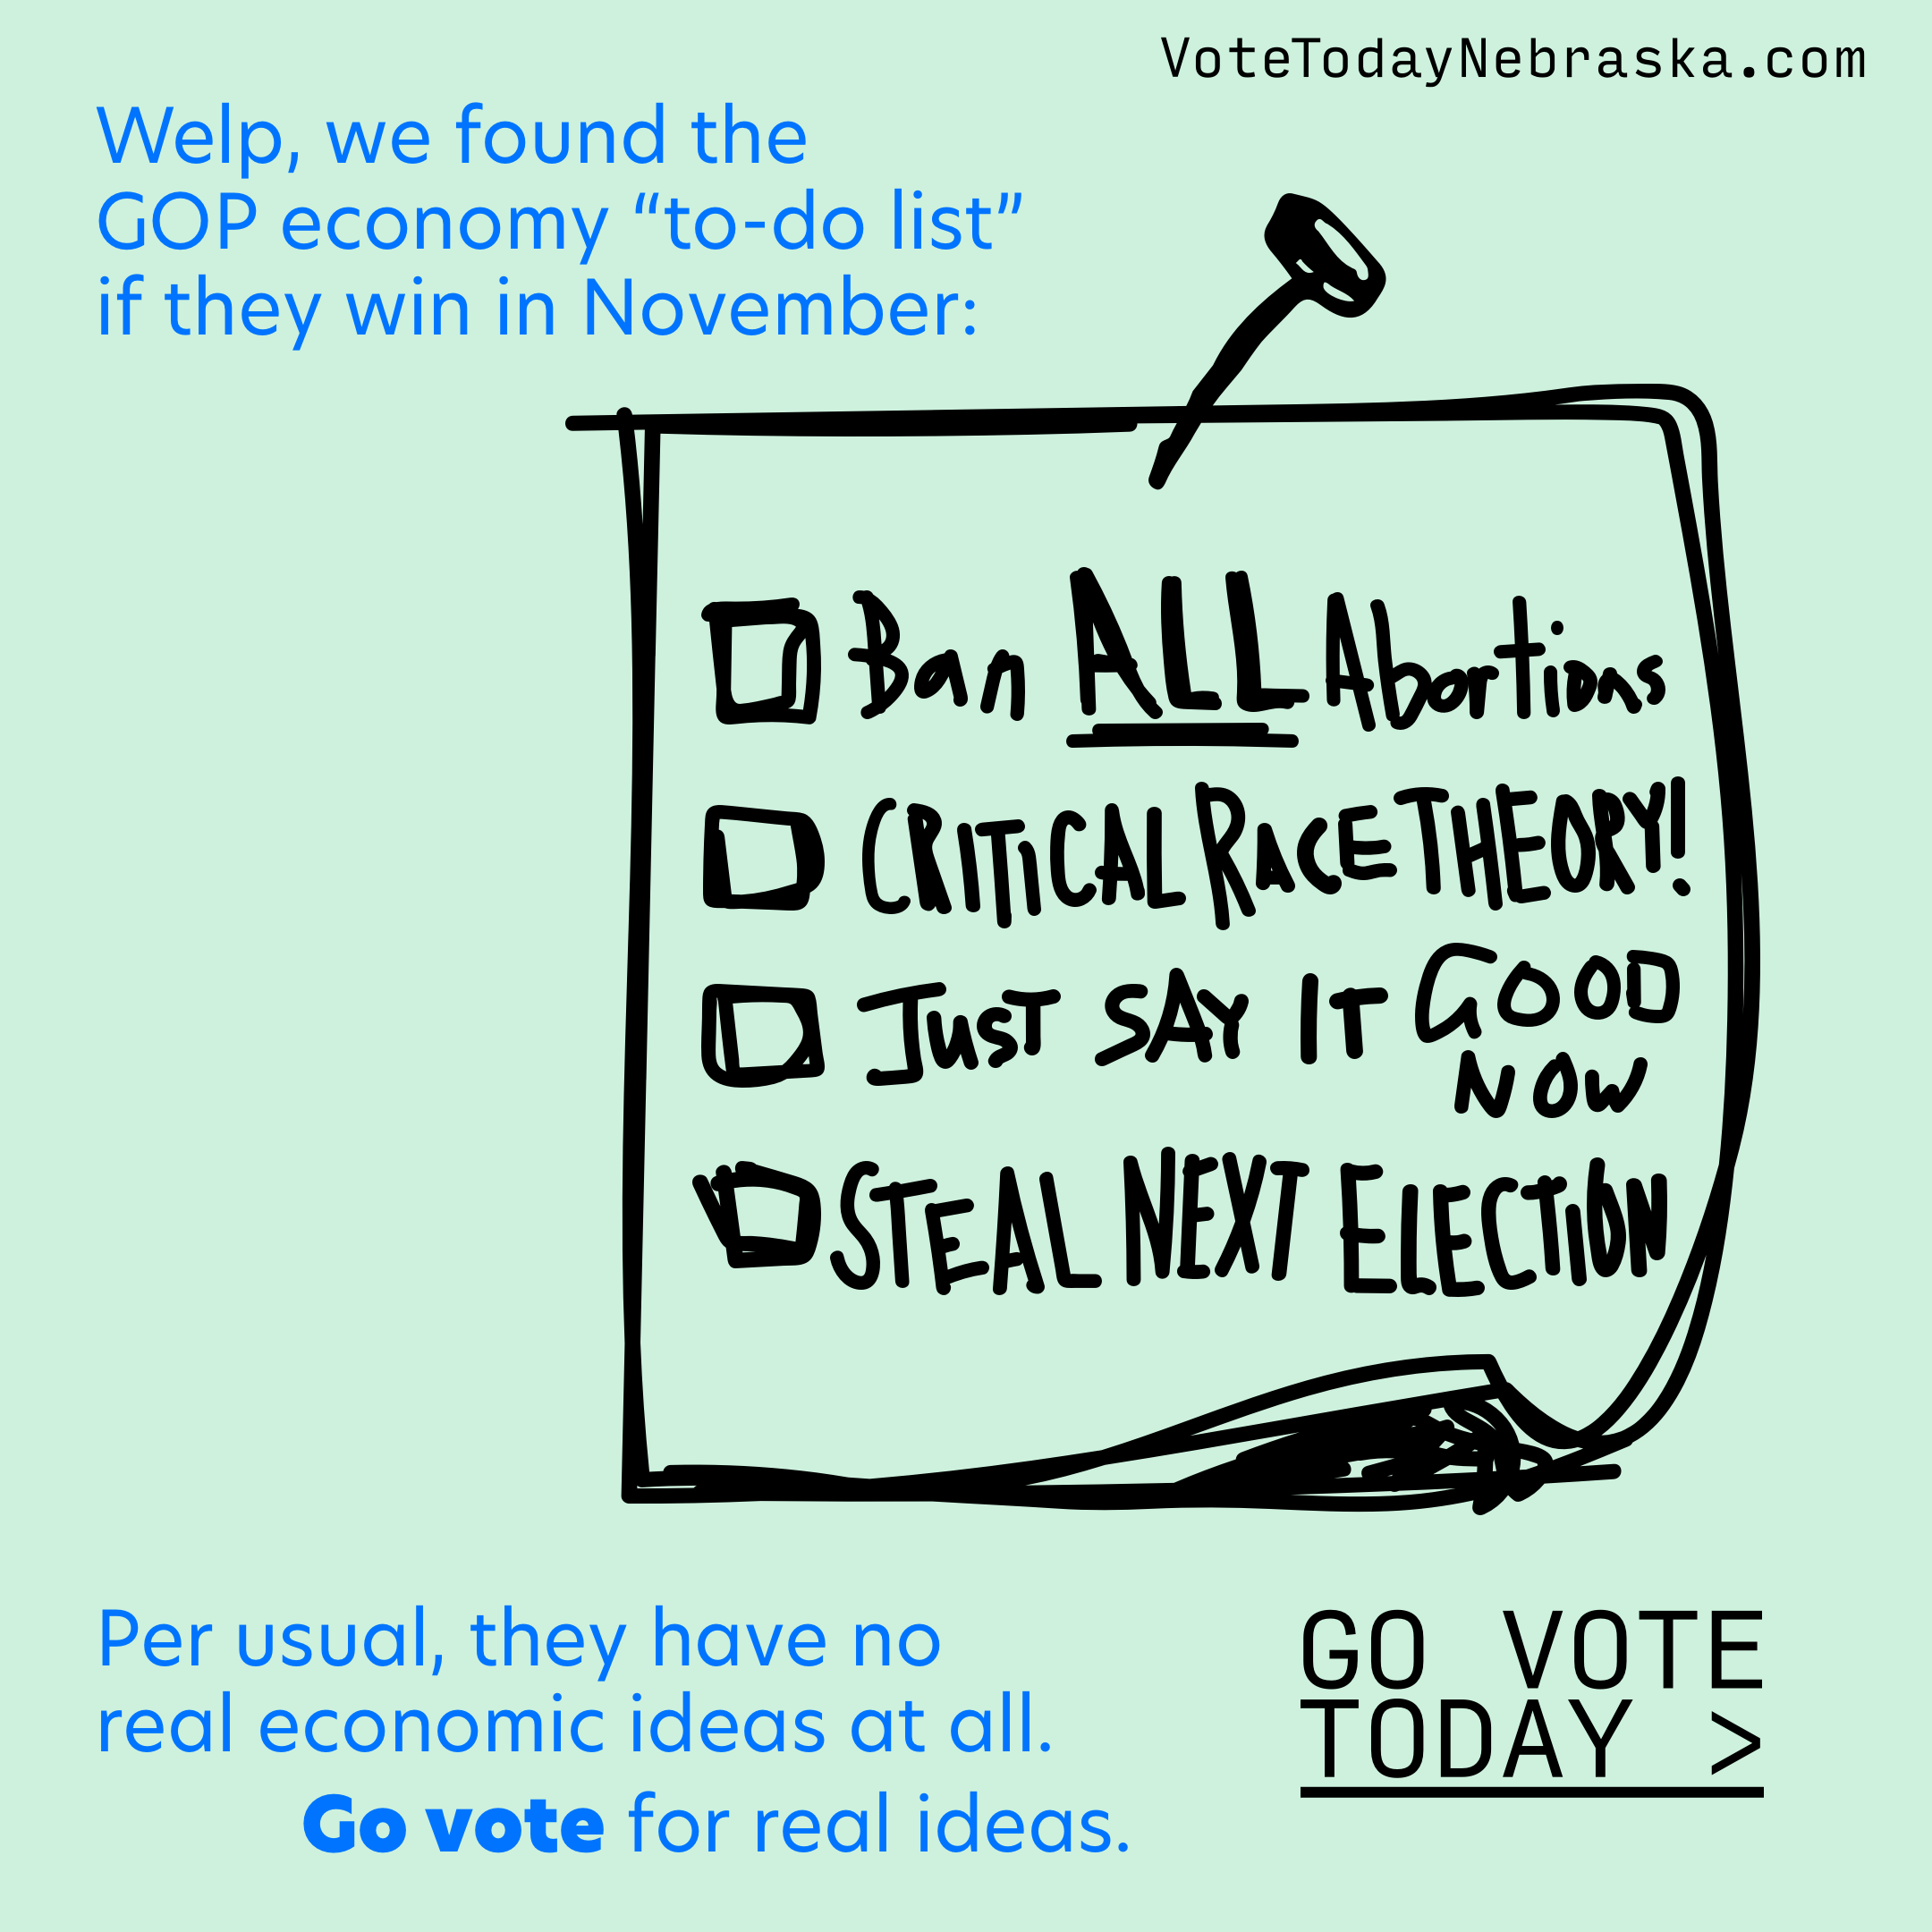 Drawing of a list with checkboxes for Ban ALL Abortions, Critical Race Theory!, Just Say It Good Now, Steal Next Election. Welp, we found the GOP economy "to-do list" if they win in November. Per usual, they have no real economic ideas at all. Go vote for real ideas. Go Vote Today >